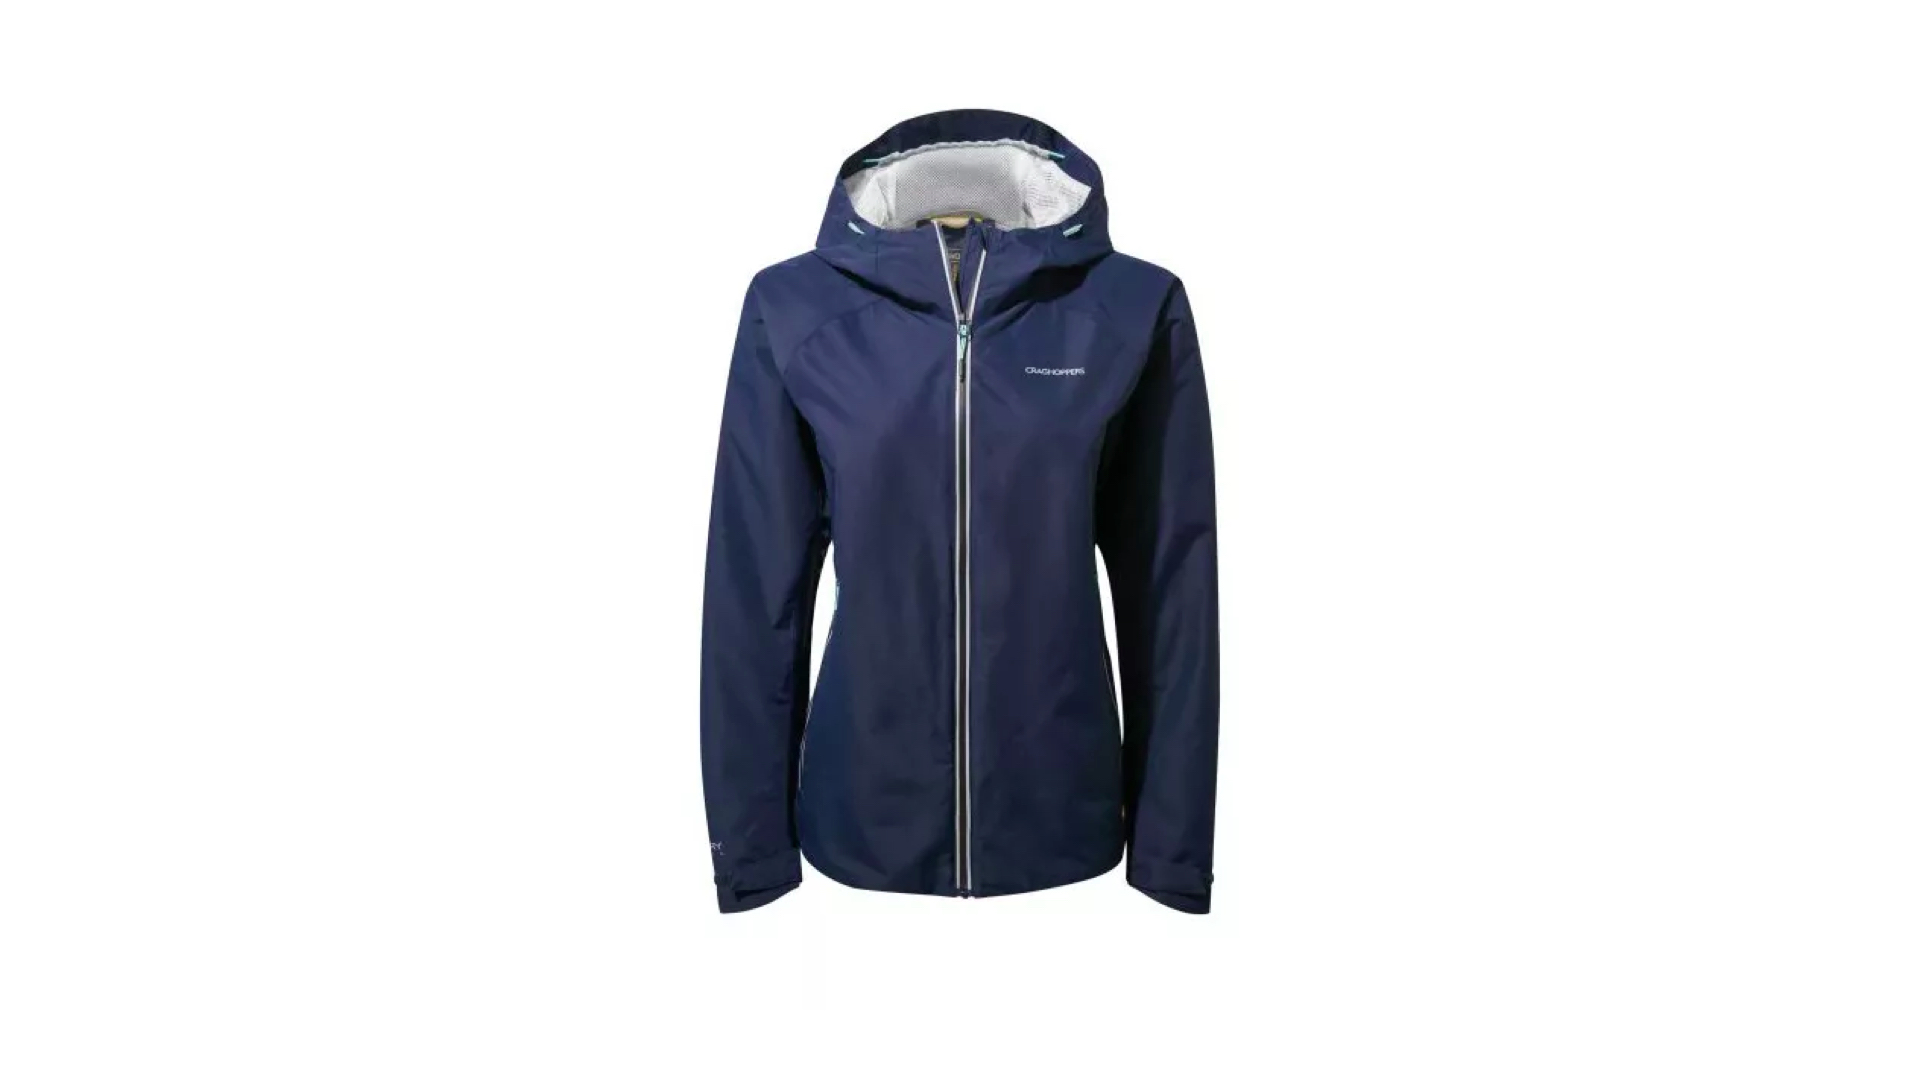 Buy Craghoppers Women's Waterproof Caldbeck Jacket from £41.95 (Today) –  Best Deals on